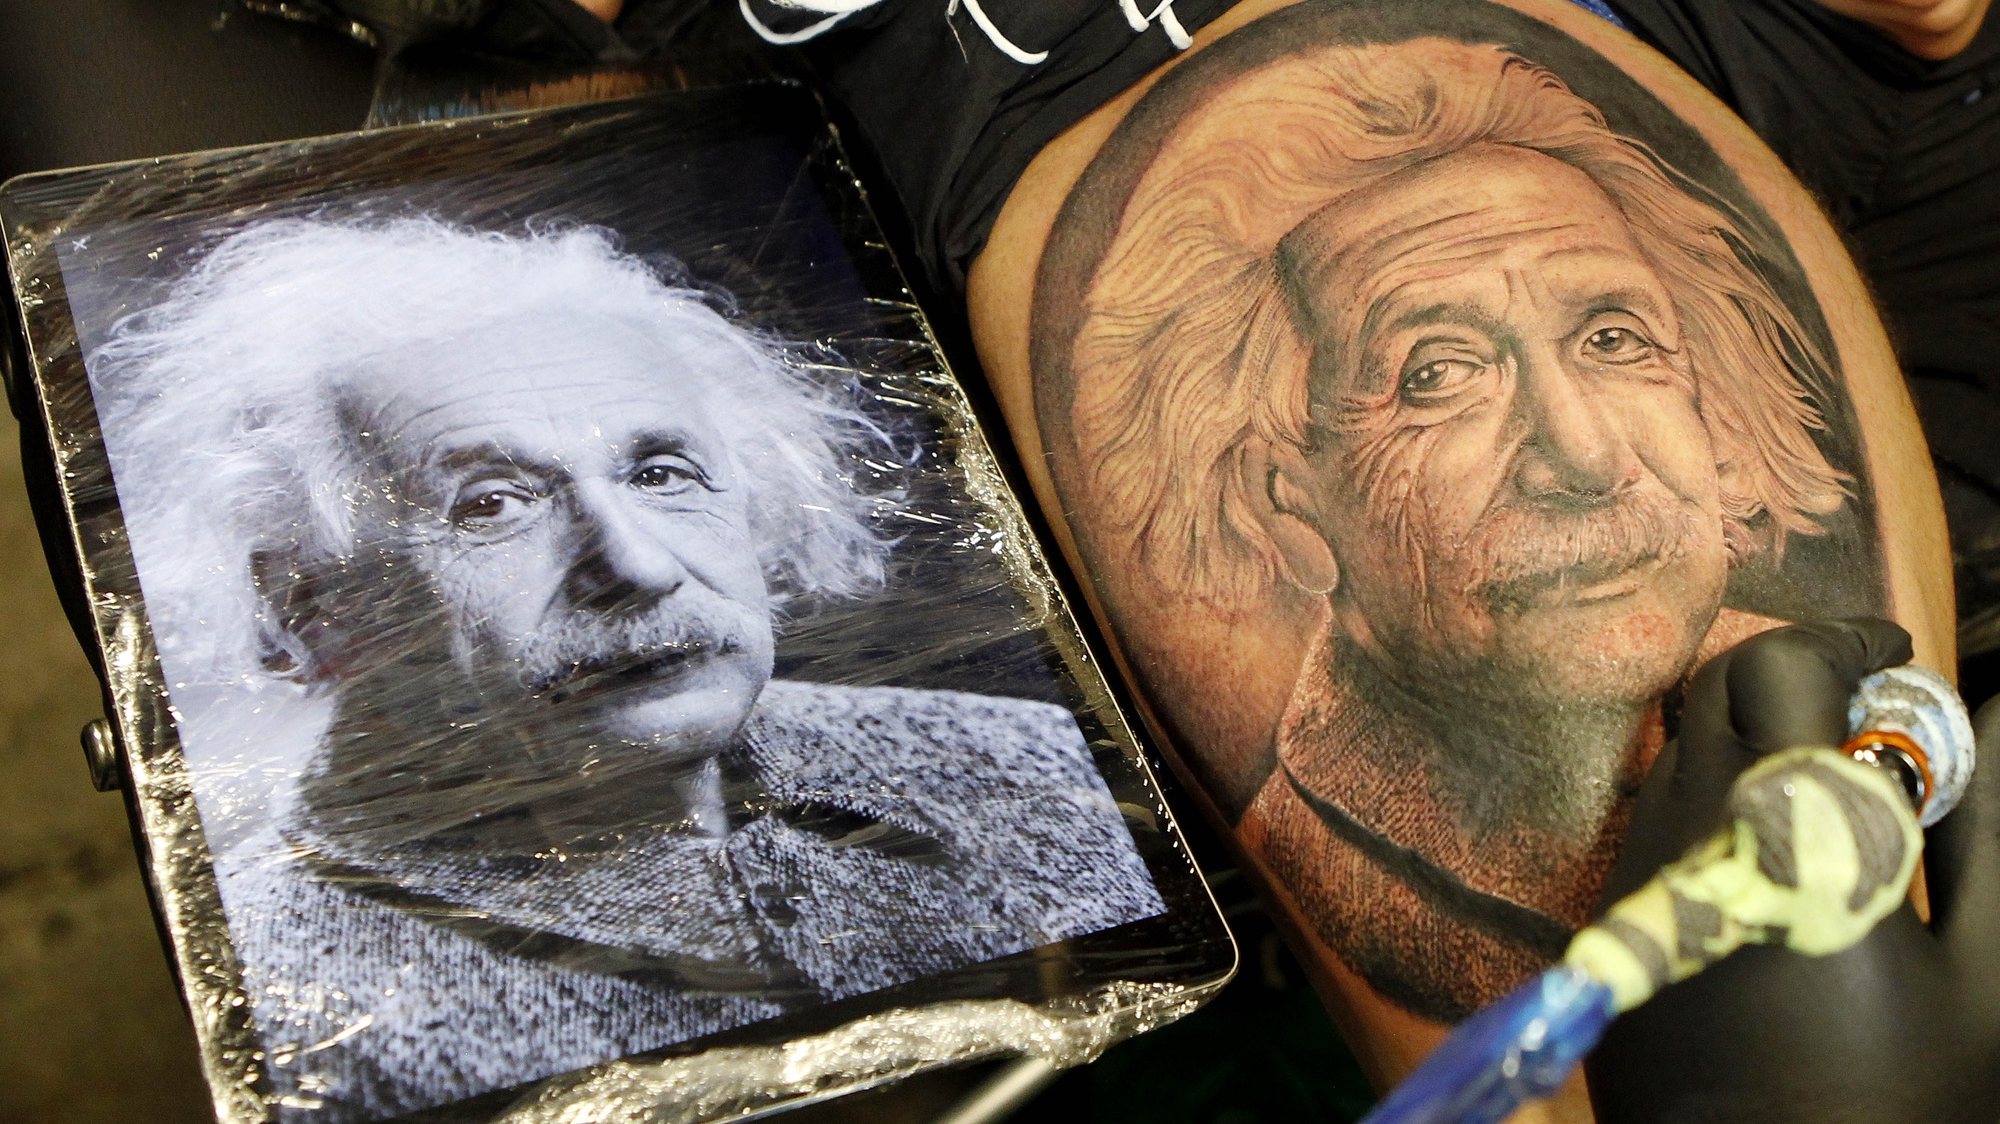 epa06781696 View of a tattoo during the of late scientist Albert Einstein during the Expotatuje Medellin 2018 tattoo convention in Medellin, Colombia, 02 June 2018.  EPA/LUIS EDUARDO NORIEGA A.